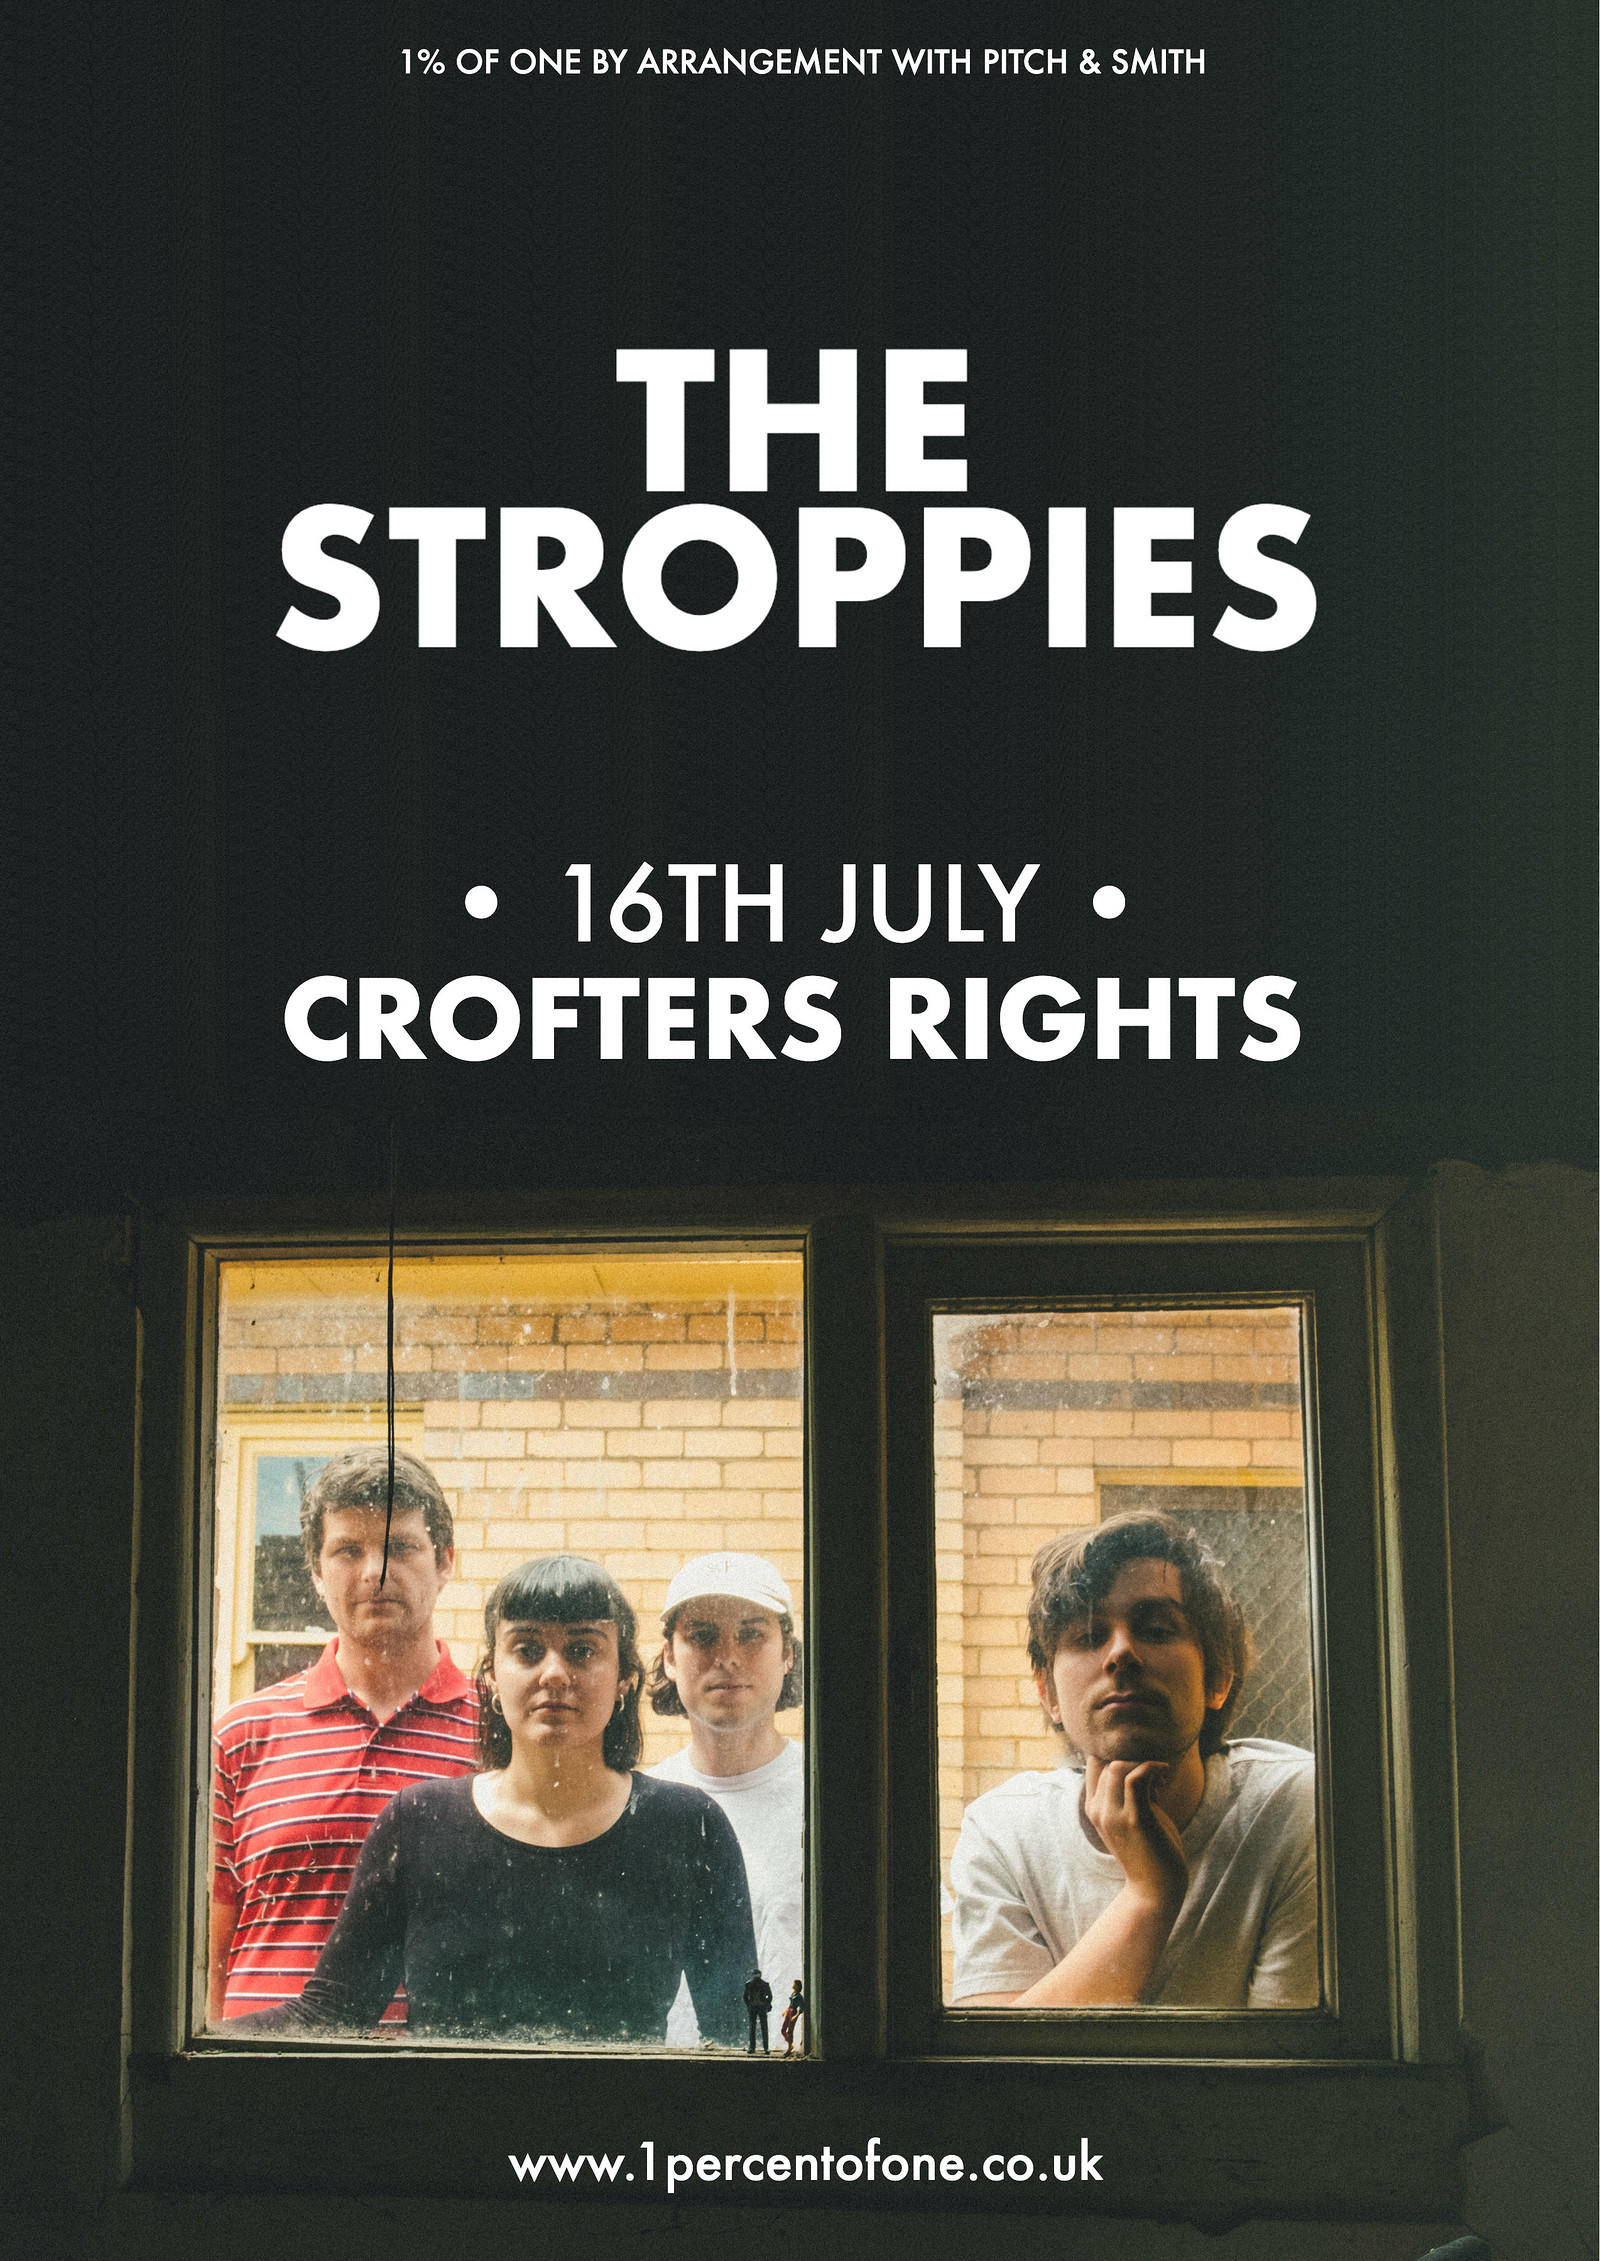 The Stroppies at Crofters Rights